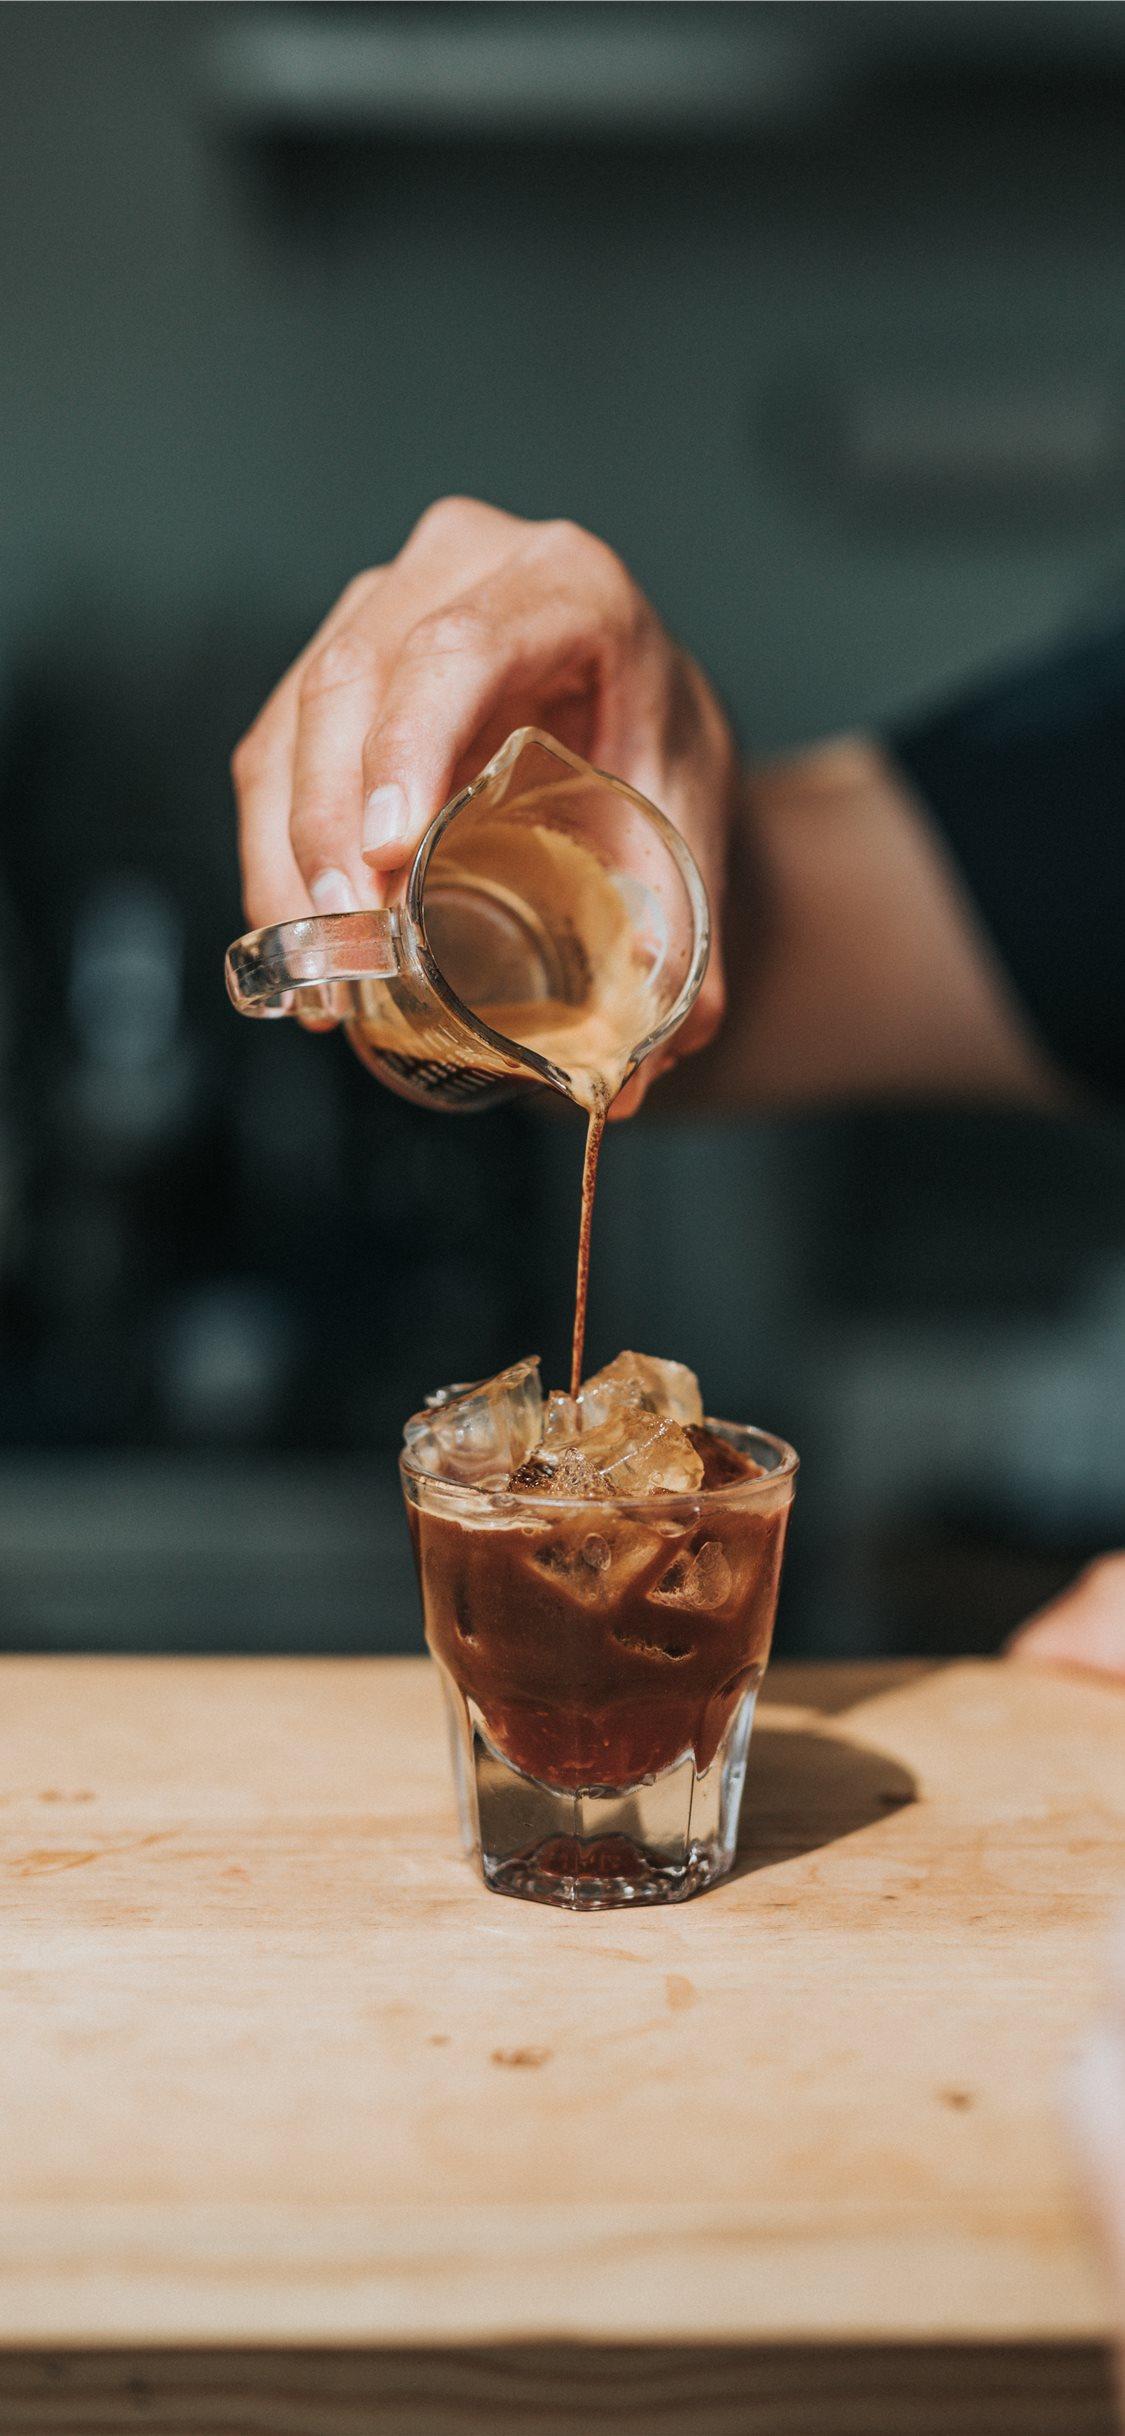 Espresso On the Rocks iPhone X Wallpaper Free Download